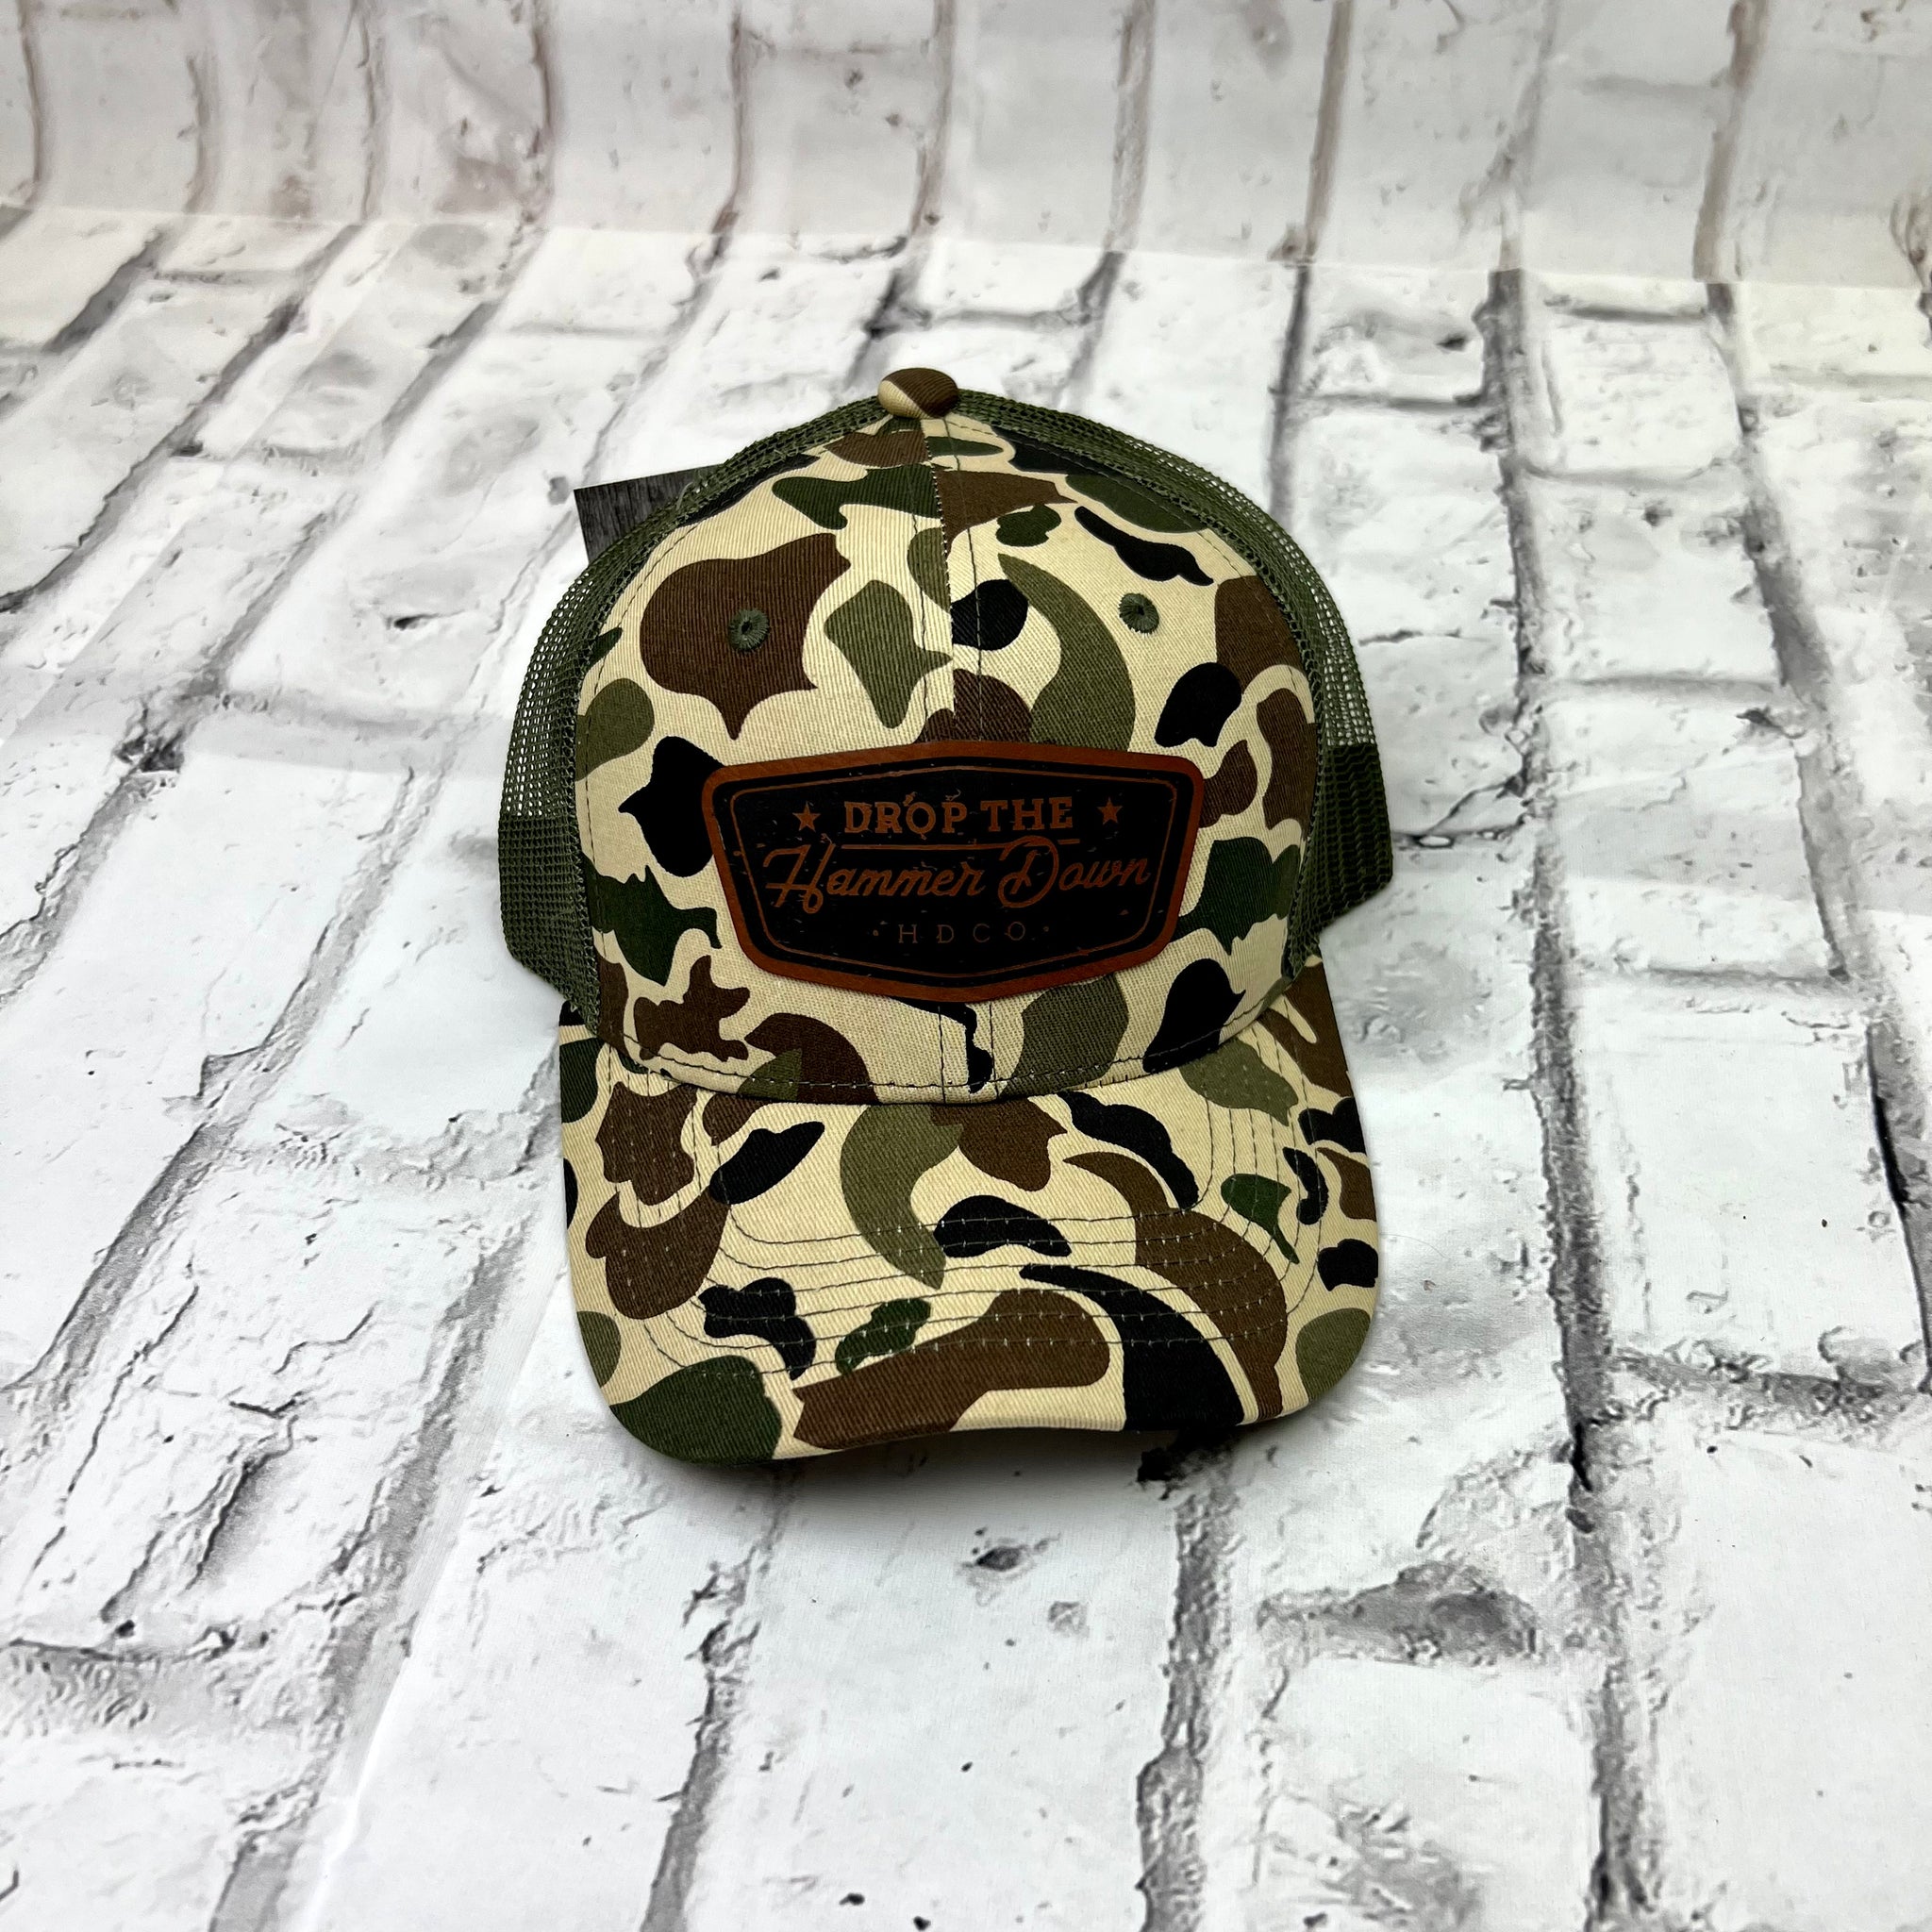 Hammer Down "DTH" Hat - Camo with Leather Patch